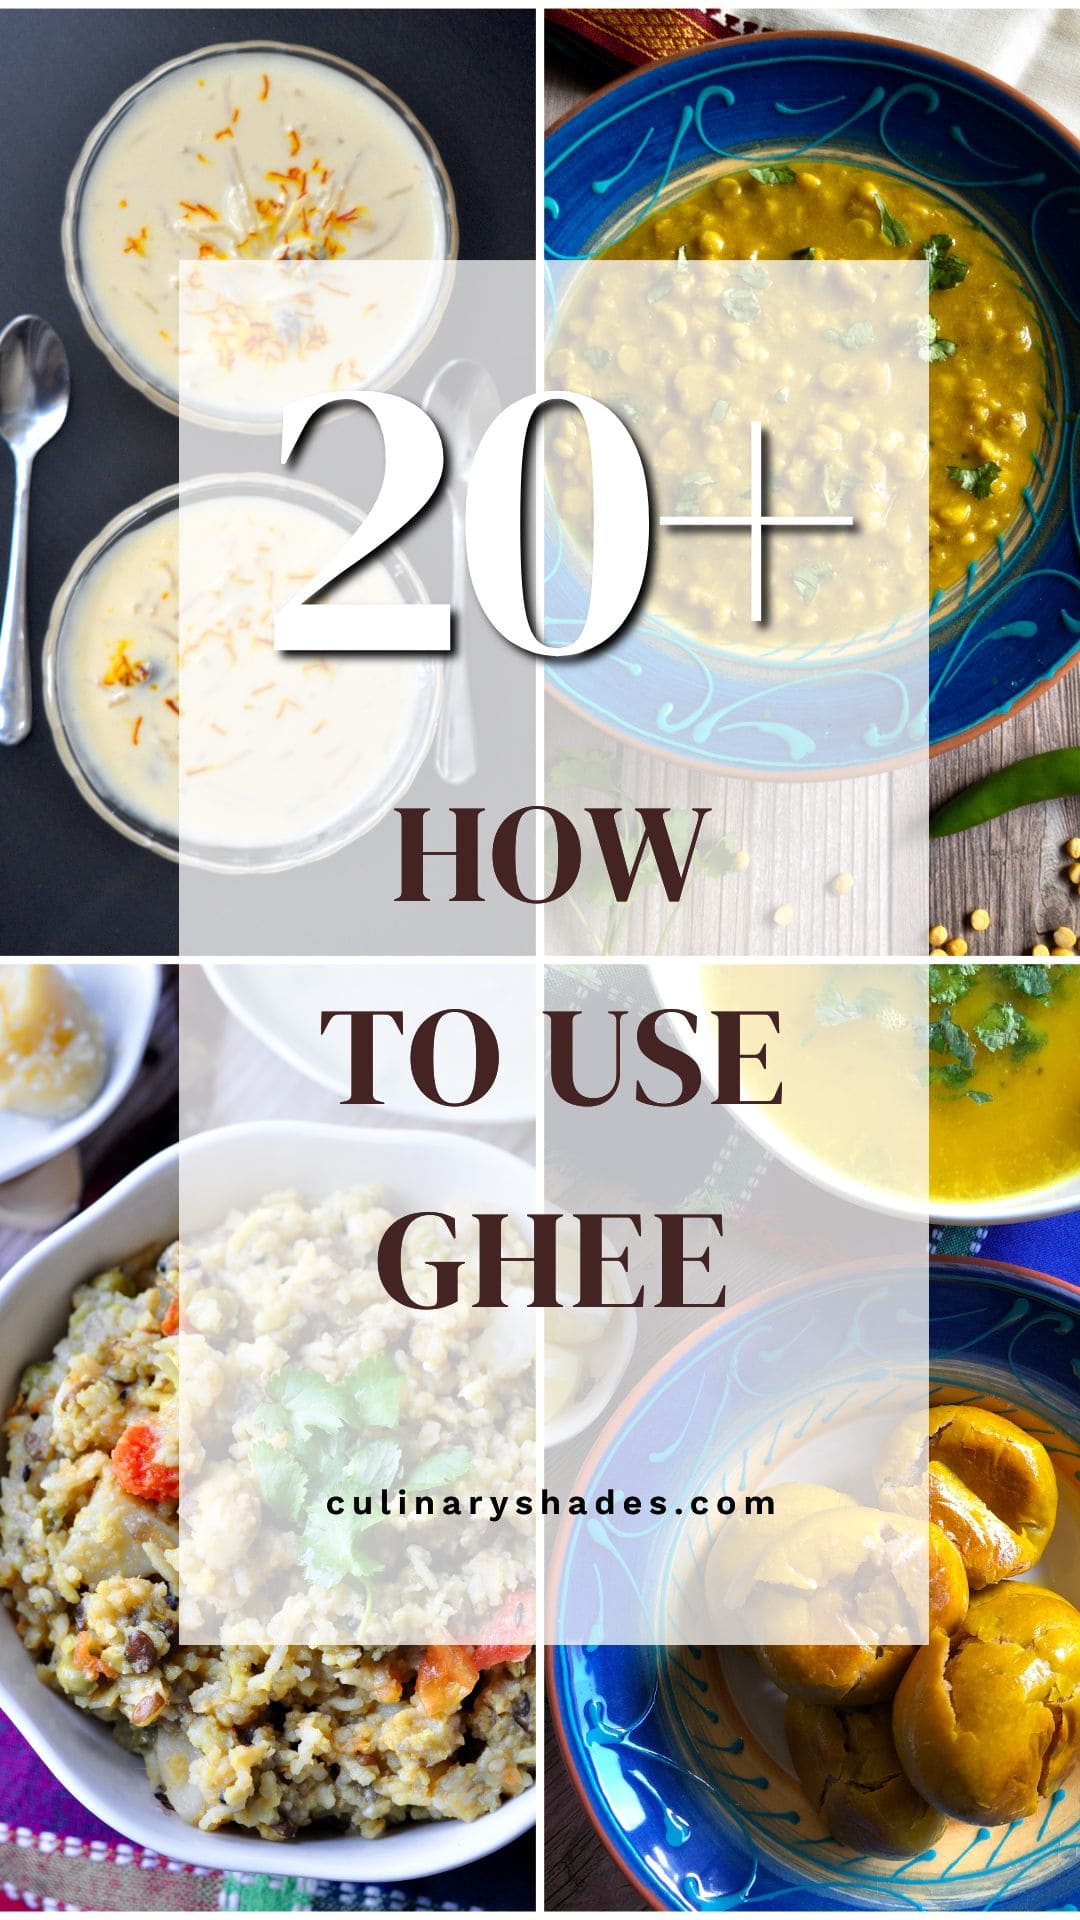 recipes with ghee.